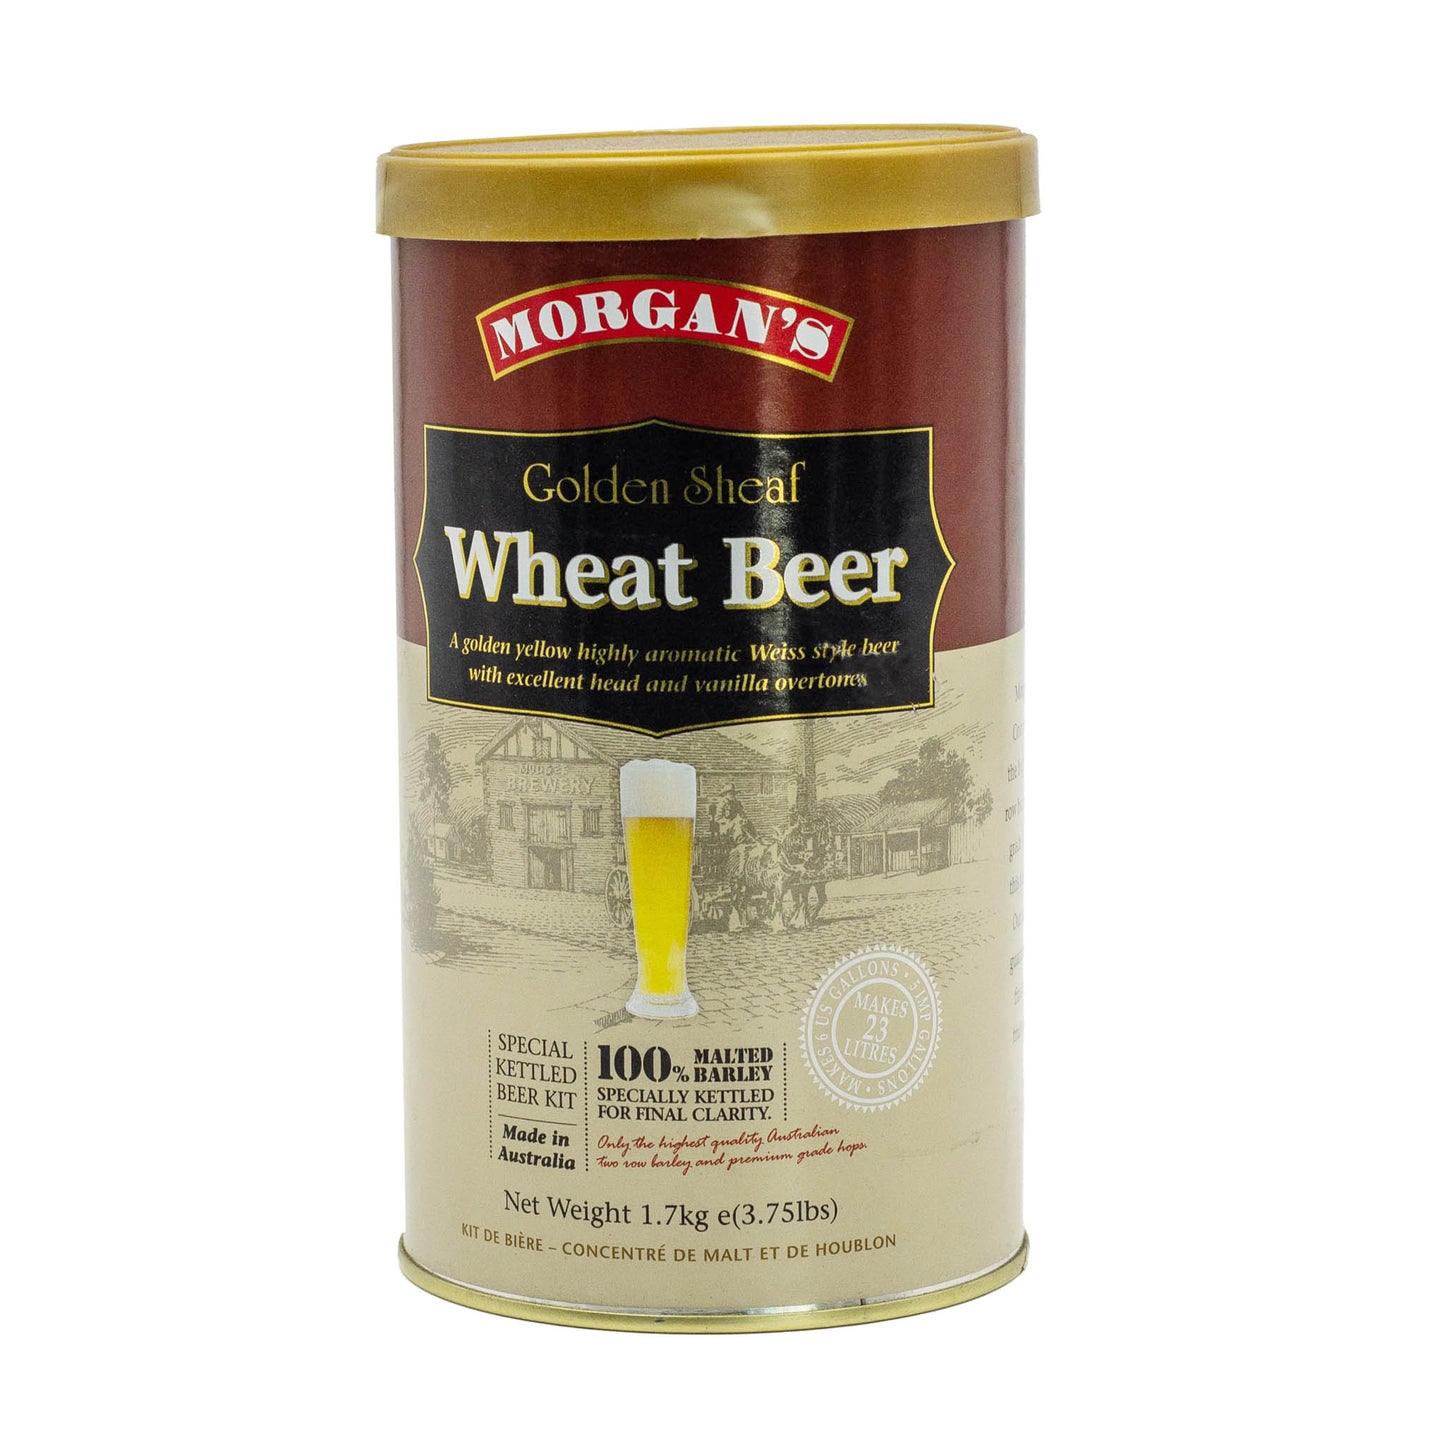 Morgans Premium Golden Sheaf wheat brew tin makes a Weiss style beer with an excellent head and vanilla overtones